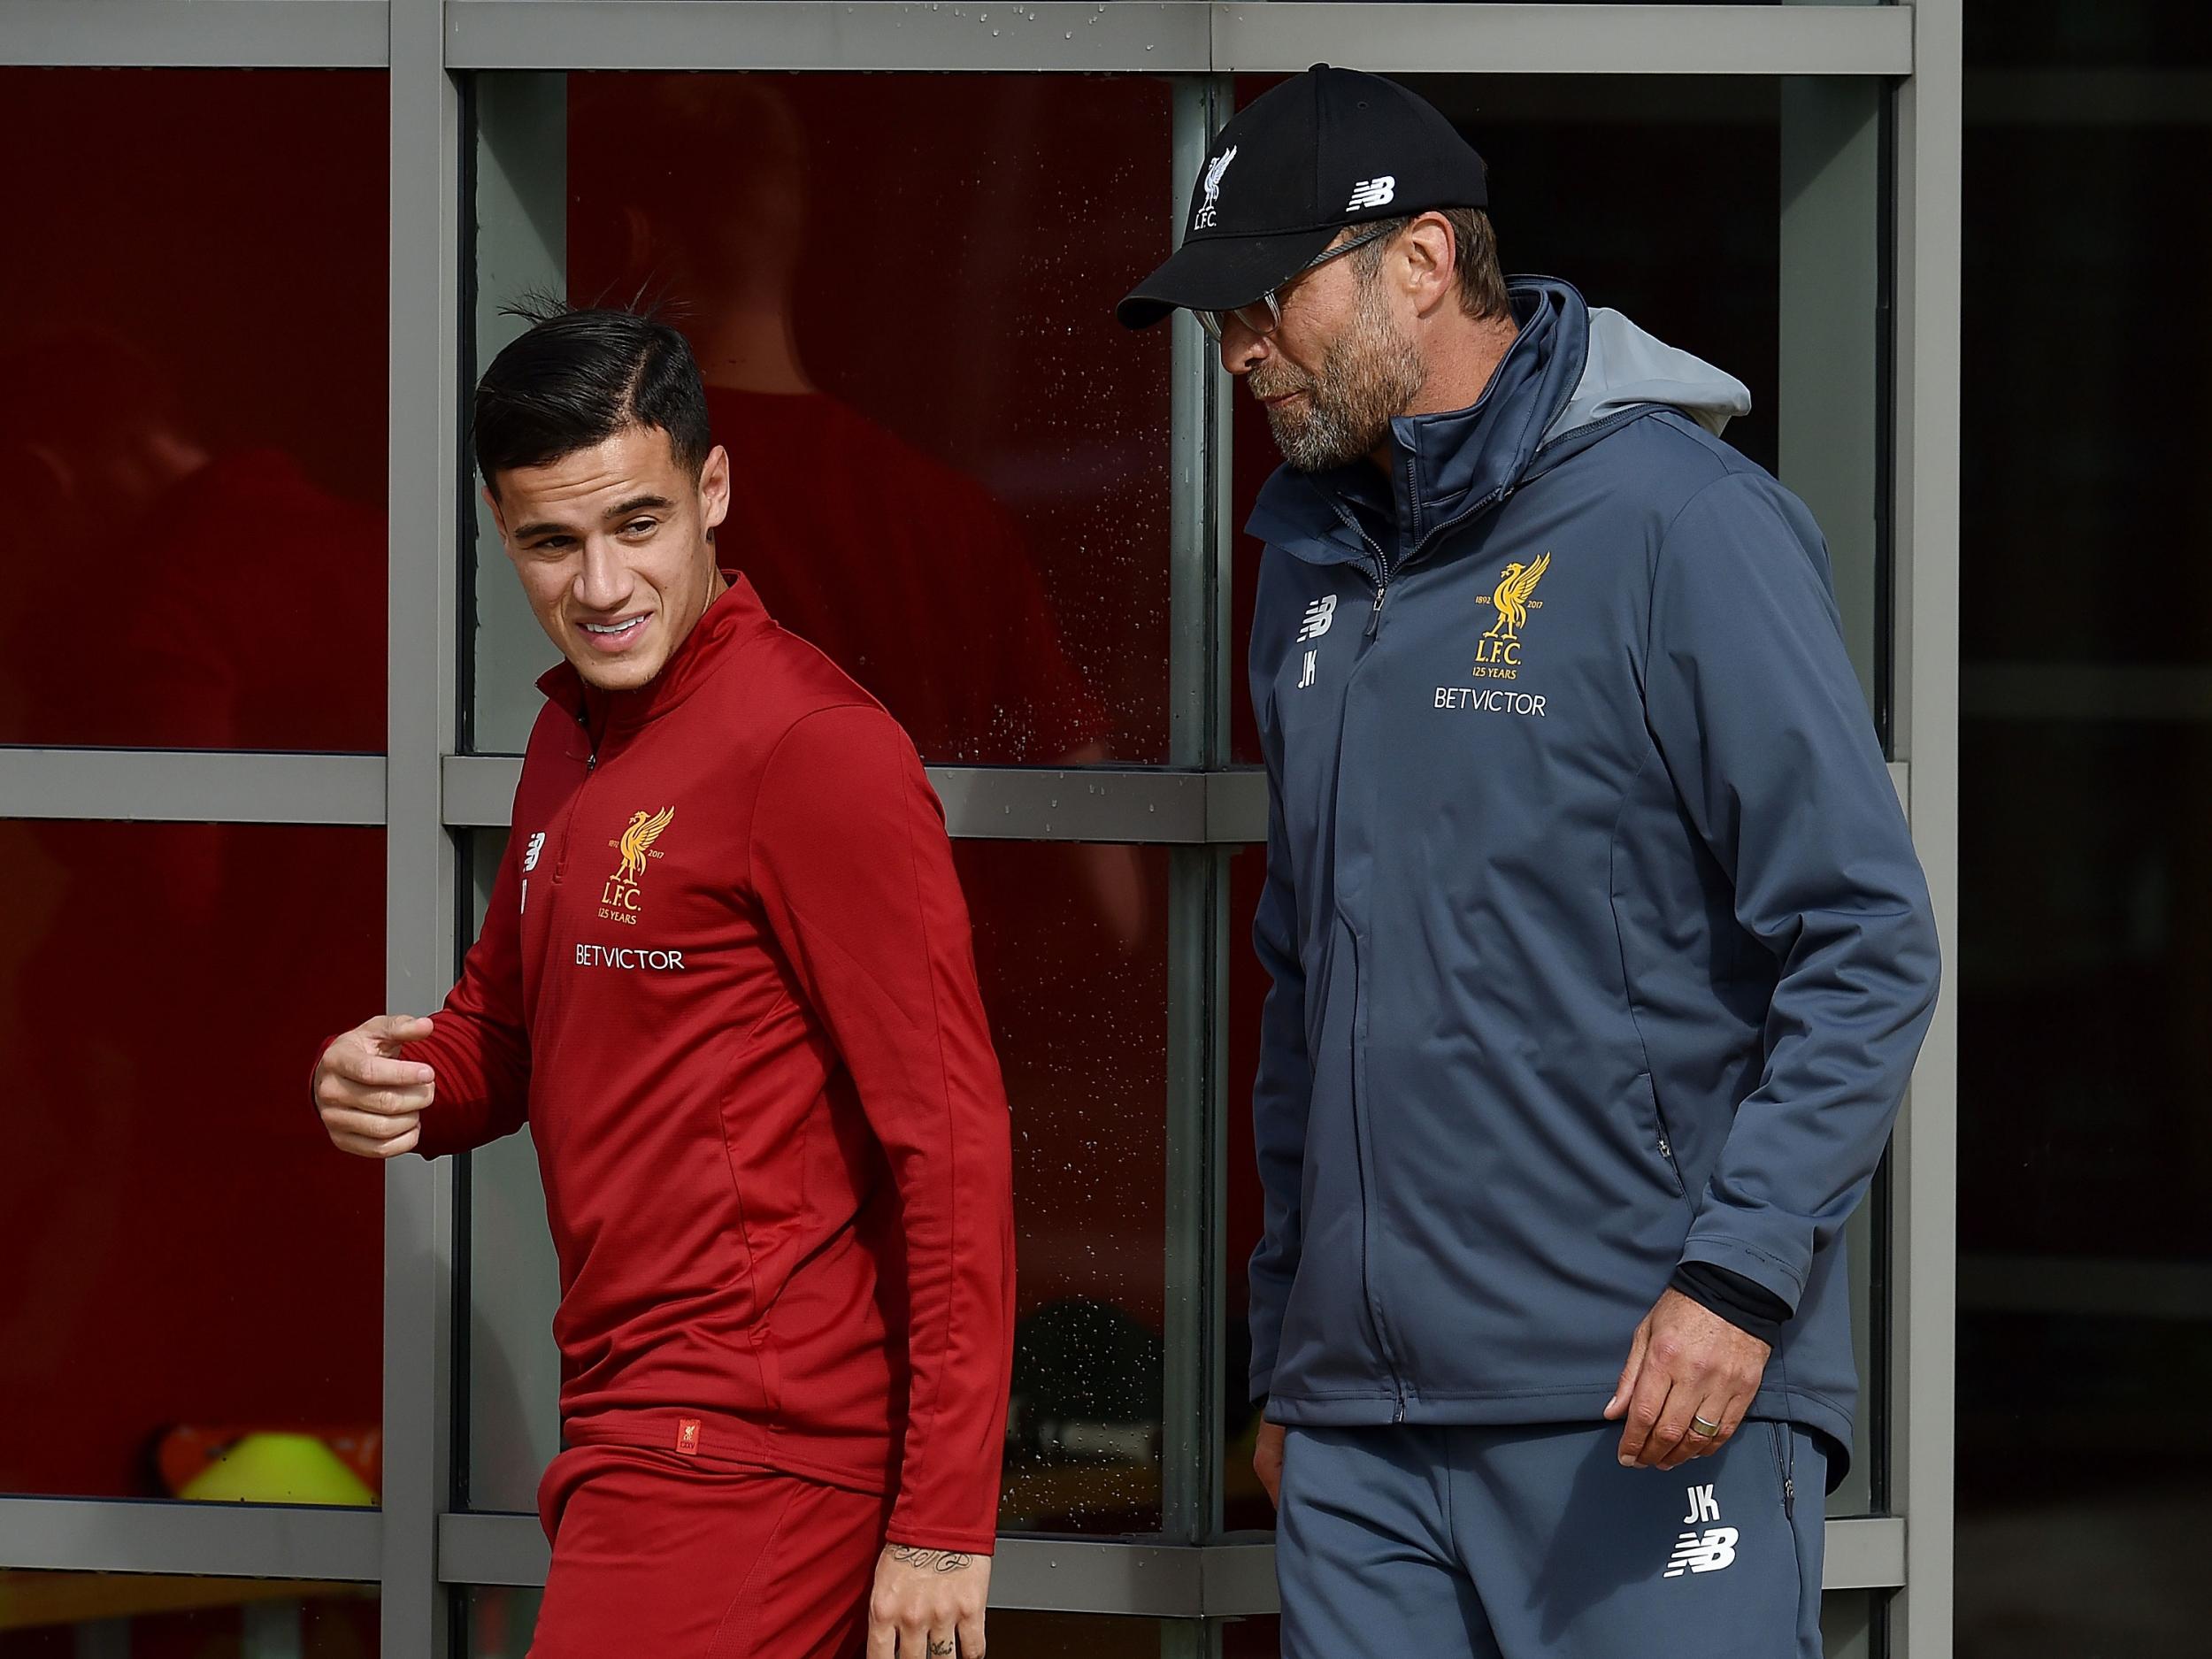 Jürgen Klopp says Liverpool had no choice but to let Philippe Coutinho go